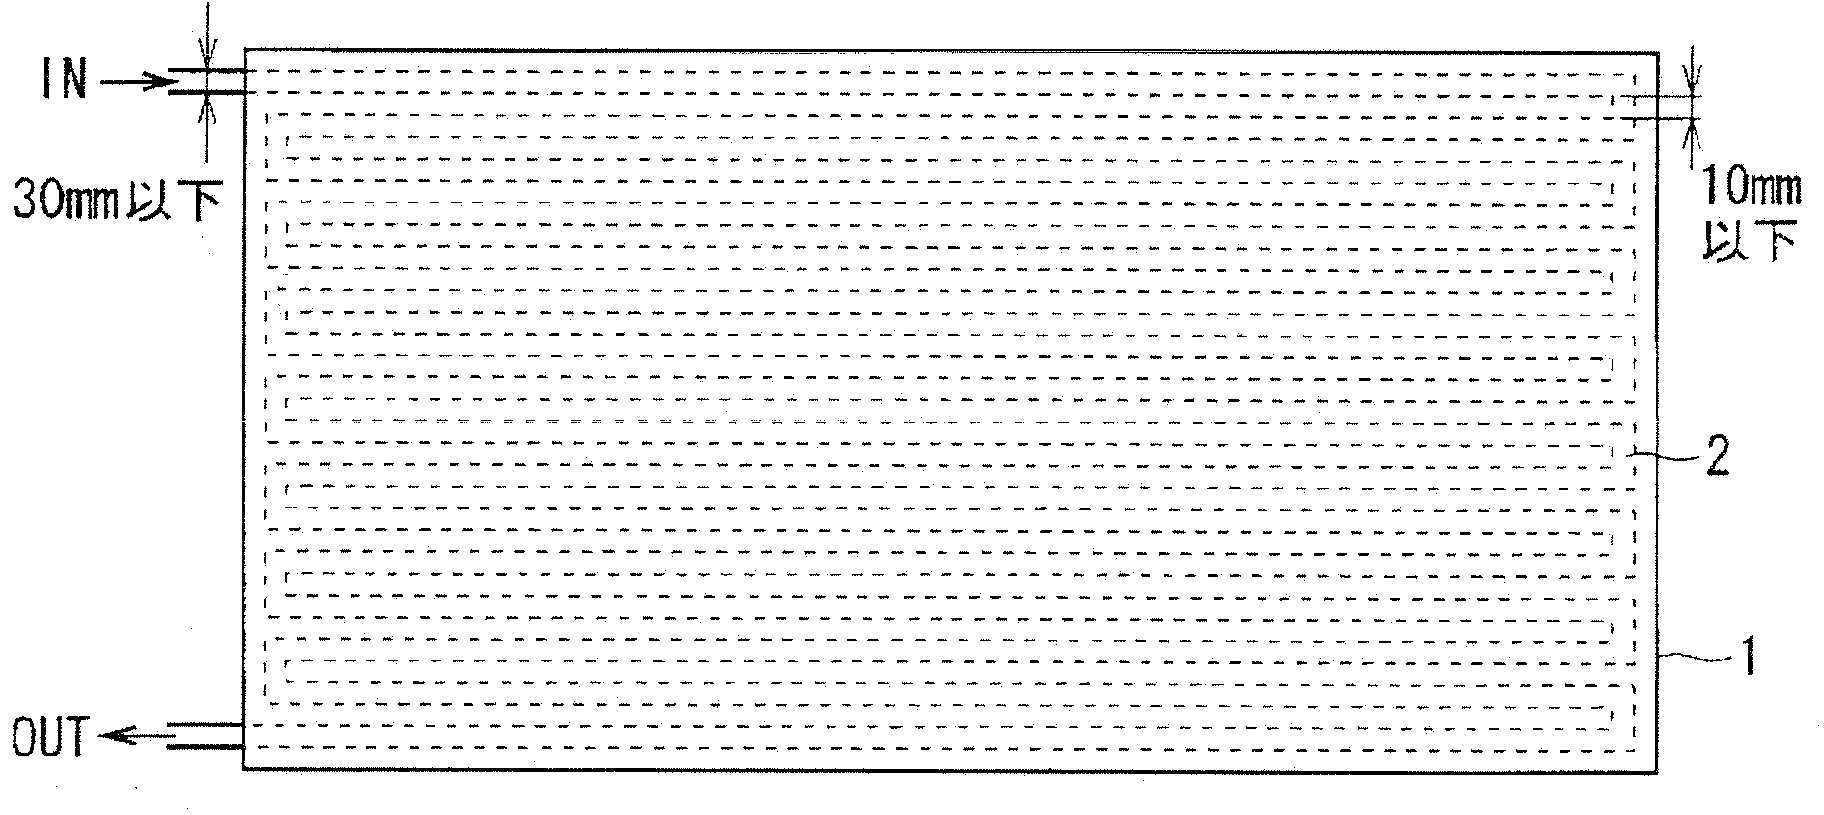 Semiconductor wafer cooling apparatus